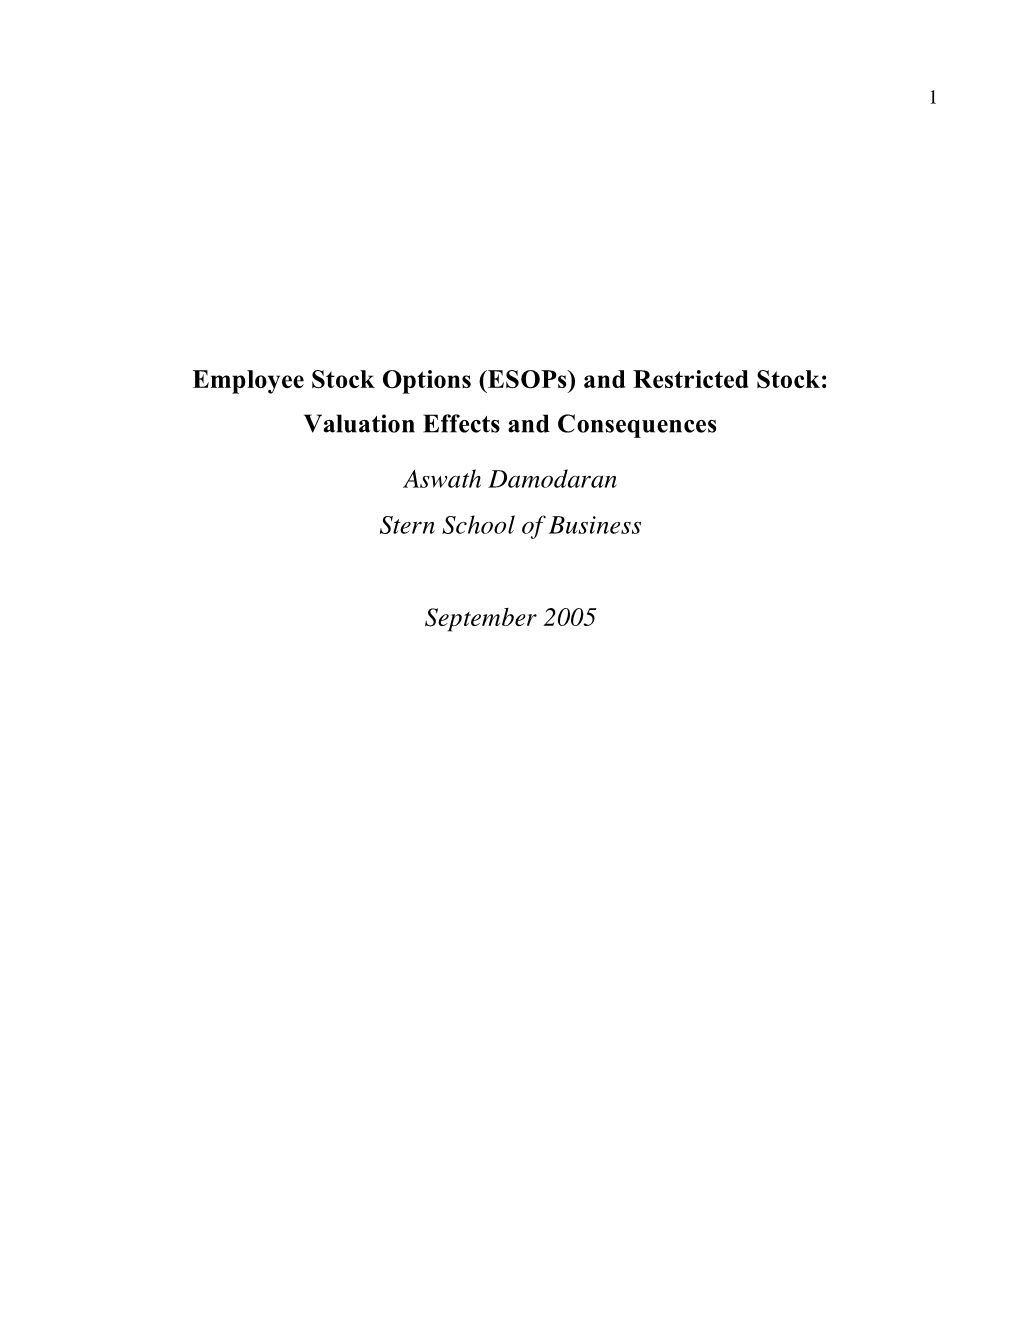 Employee Stock Options (Esops) and Restricted Stock: Valuation Effects and Consequences Aswath Damodaran Stern School of Busines